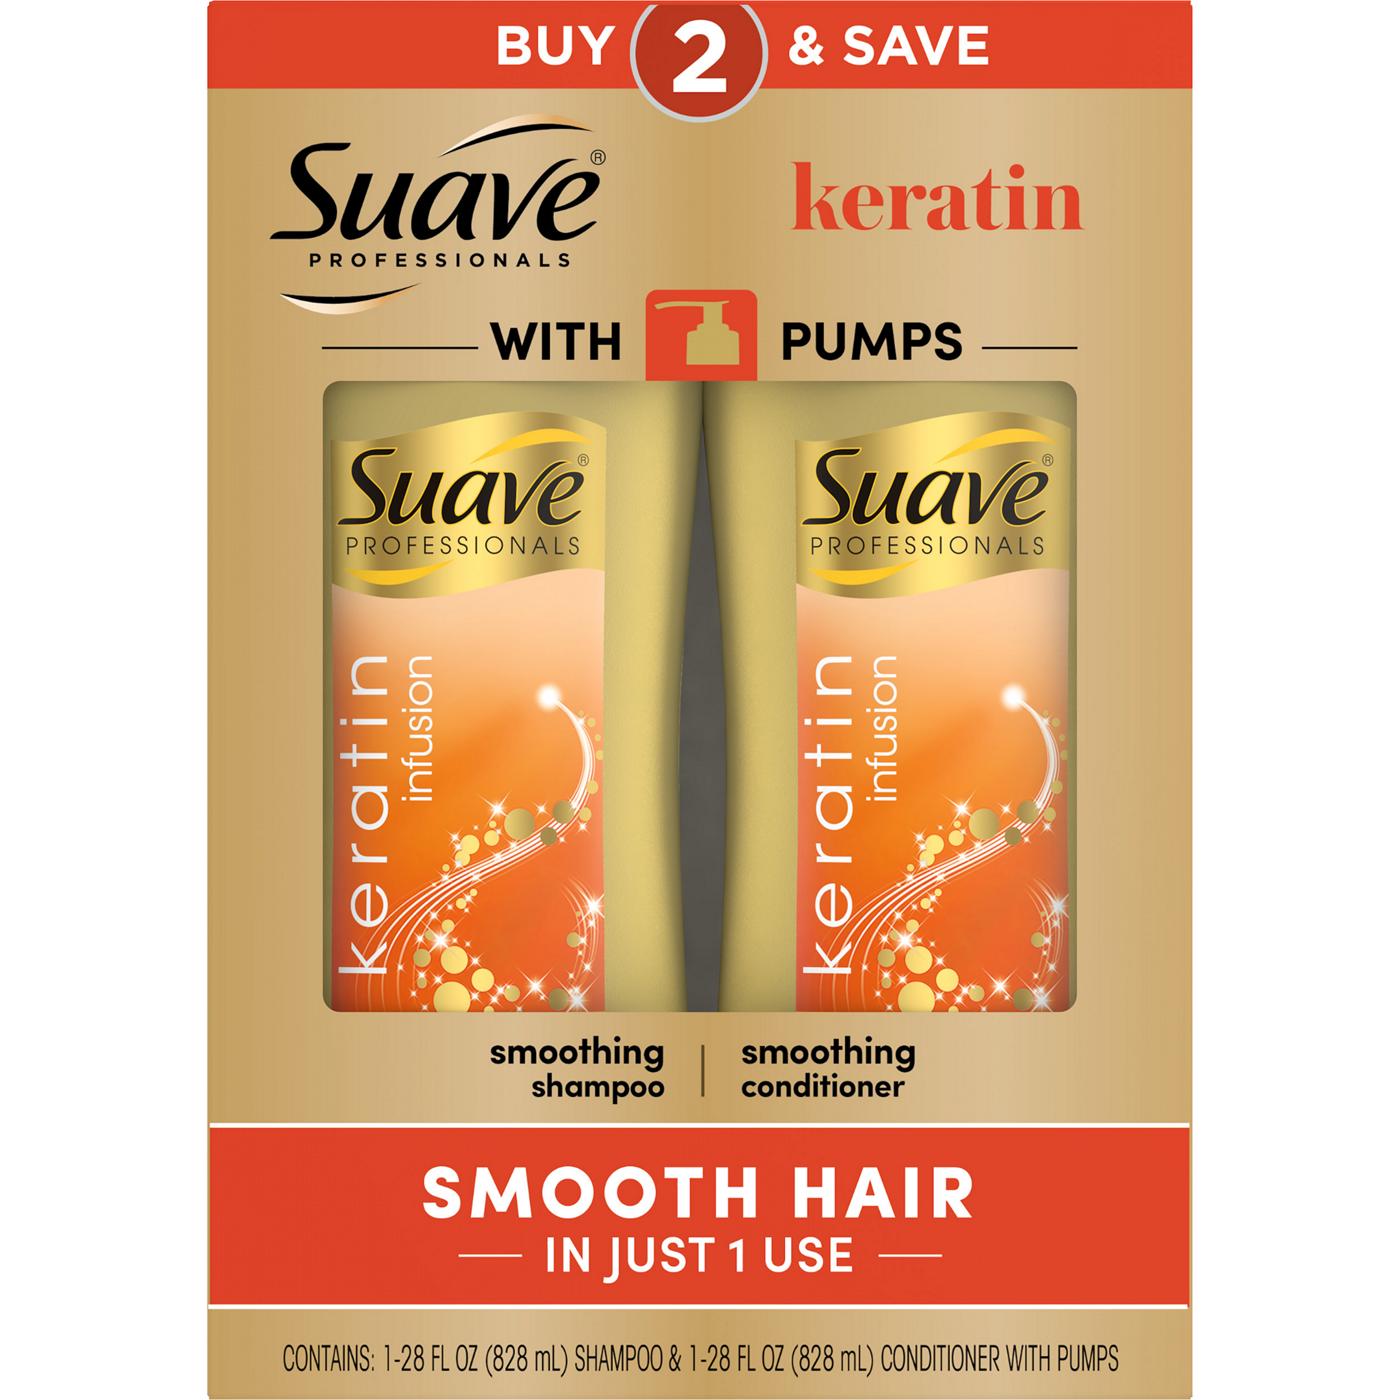 Suave Professionals Keratin Infusion Smoothing Shampoo + Conditioner; image 1 of 2